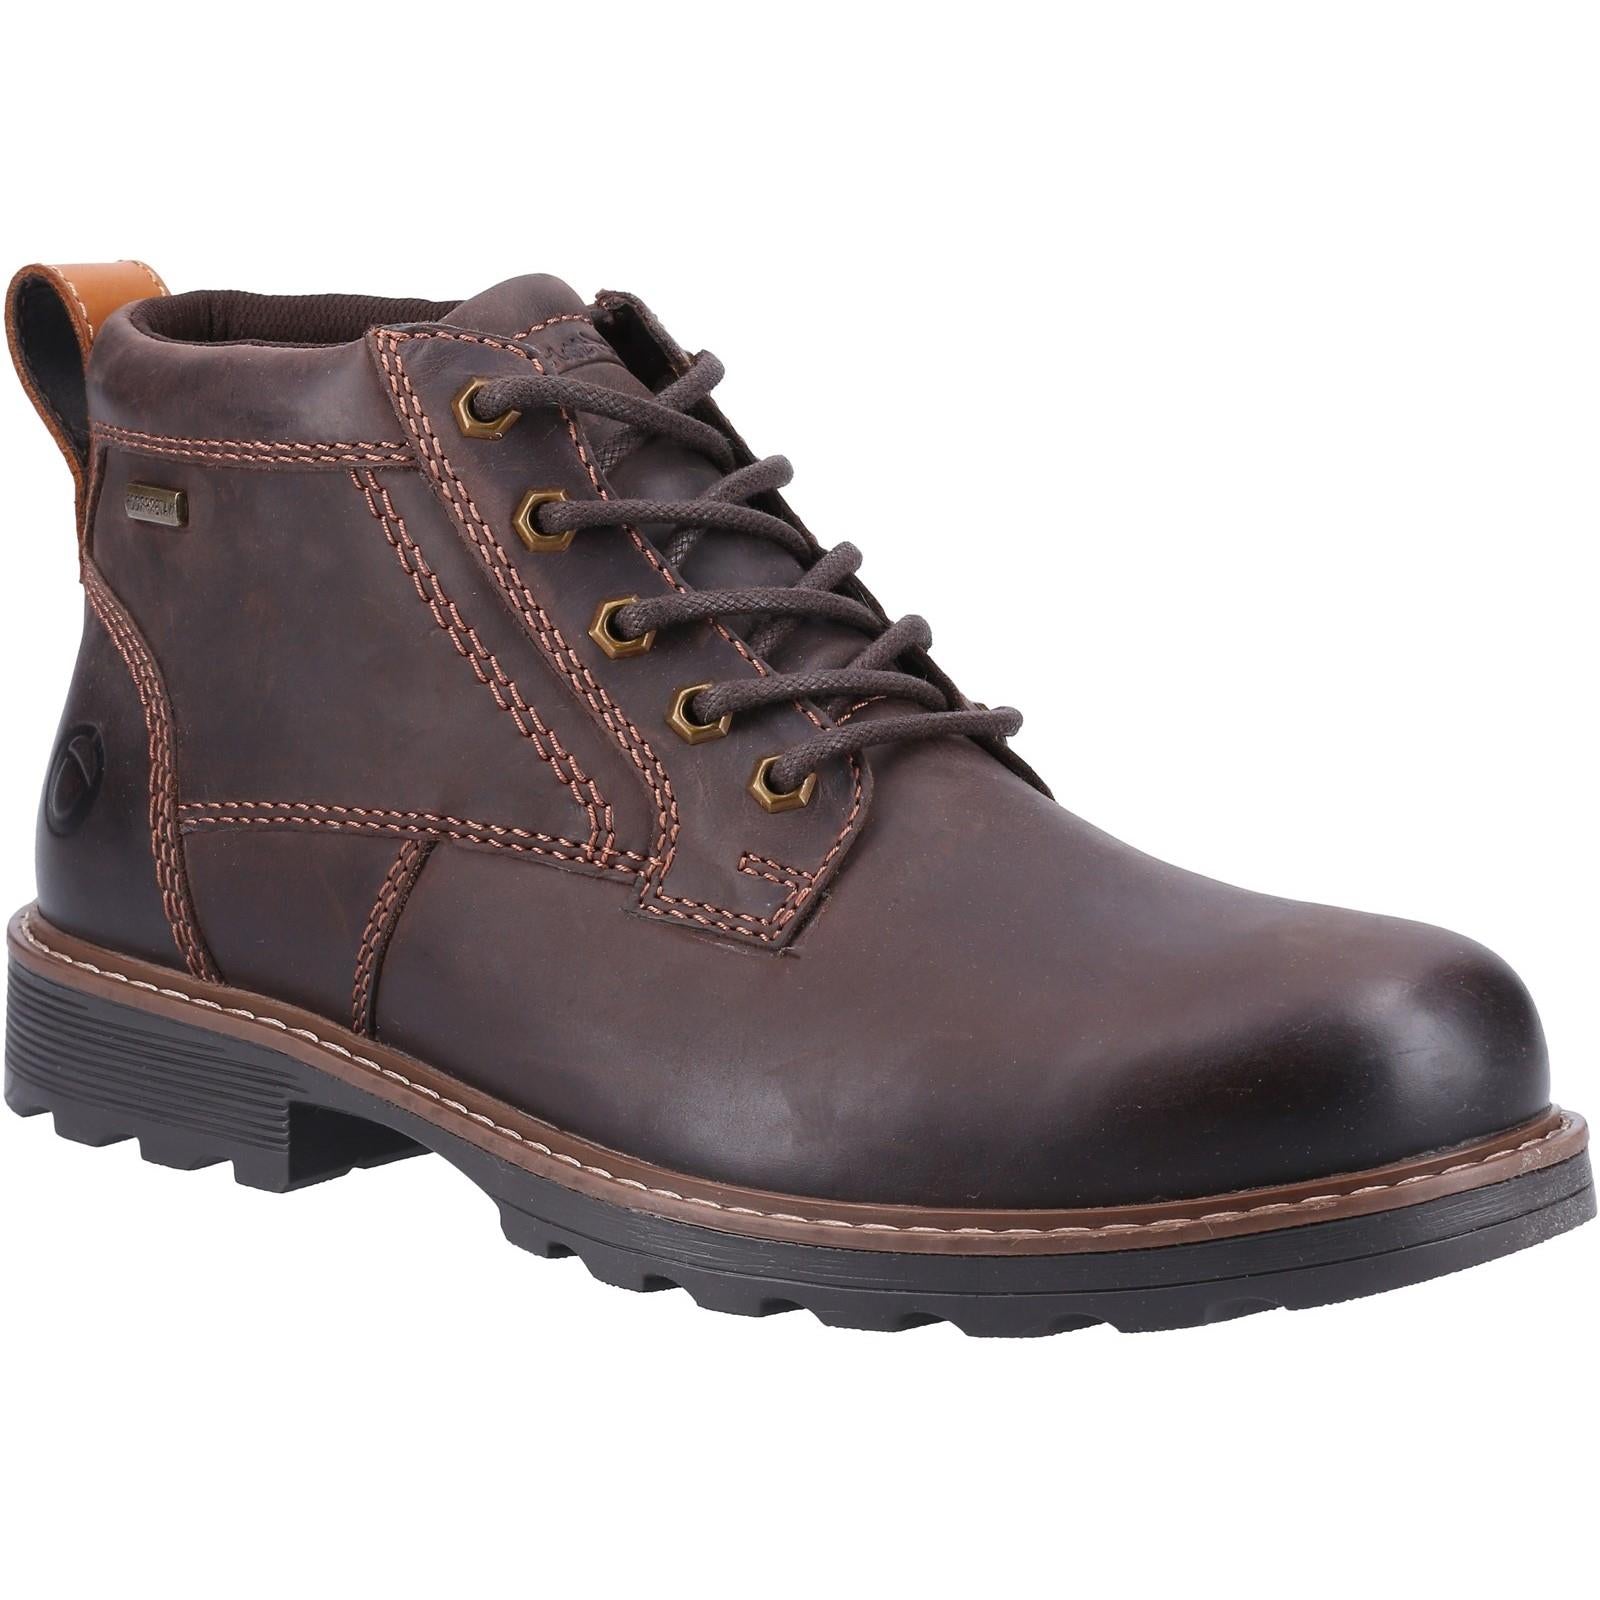 Cotswold Falfield brown leather waterproof lace up boots